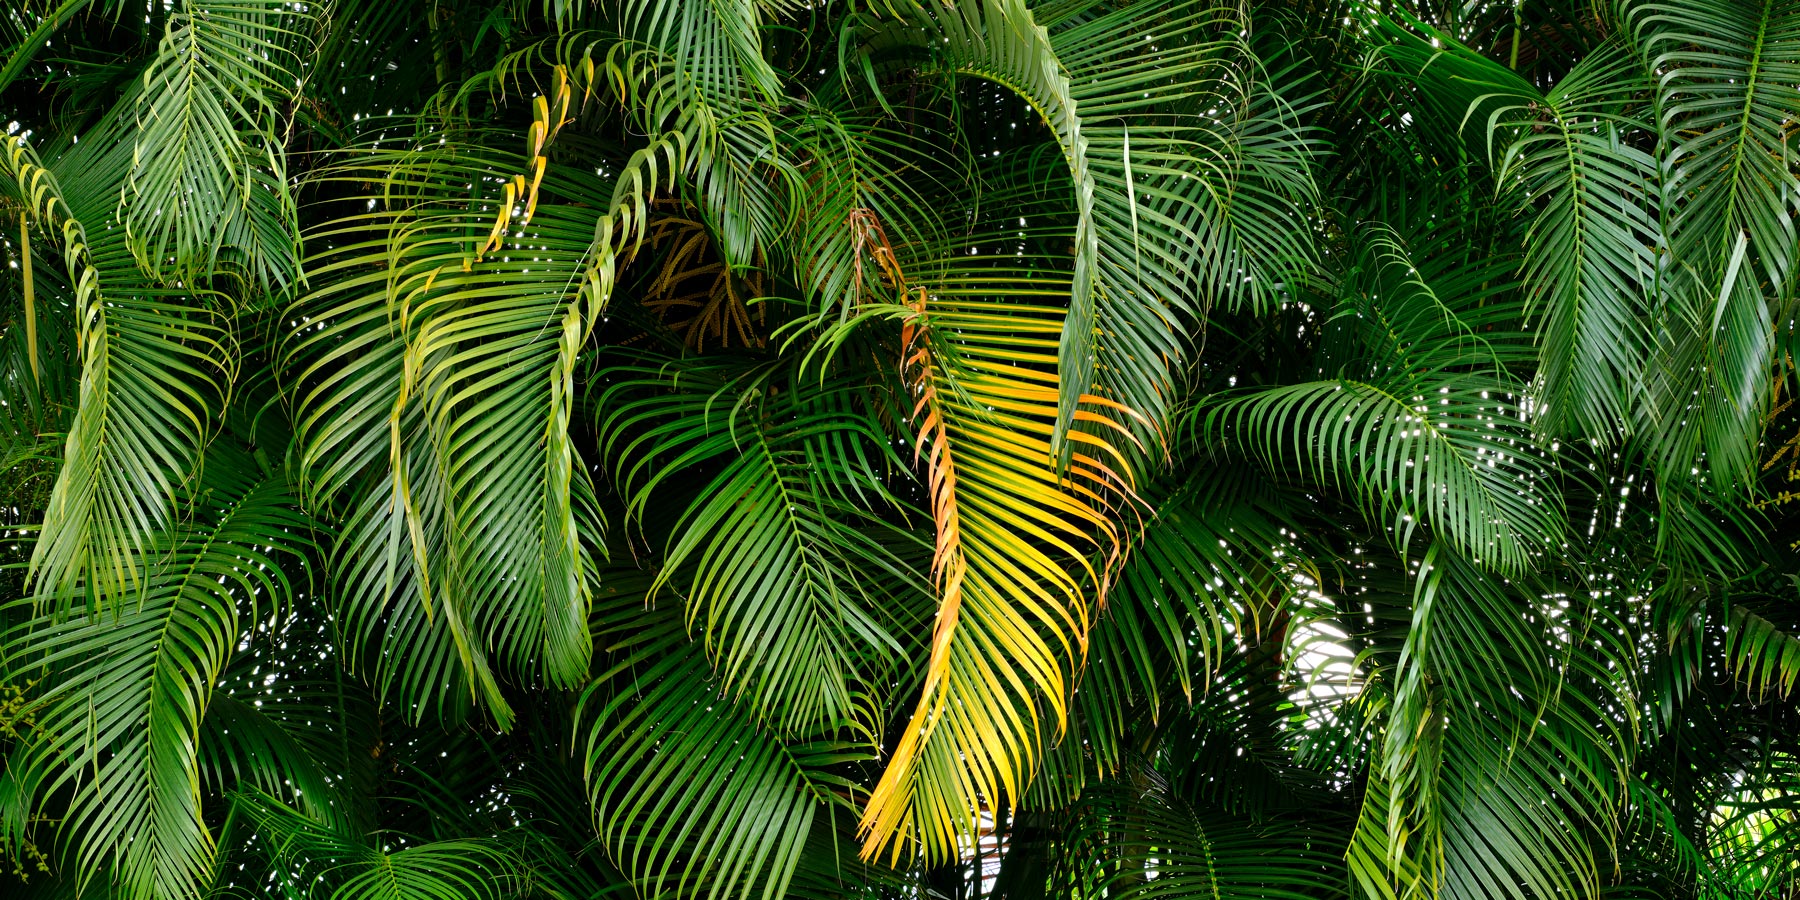 one palm stands out from the others in this abstract panoramic photograph of green palms taken by award winning Maui photographer Andrew Shoemaker